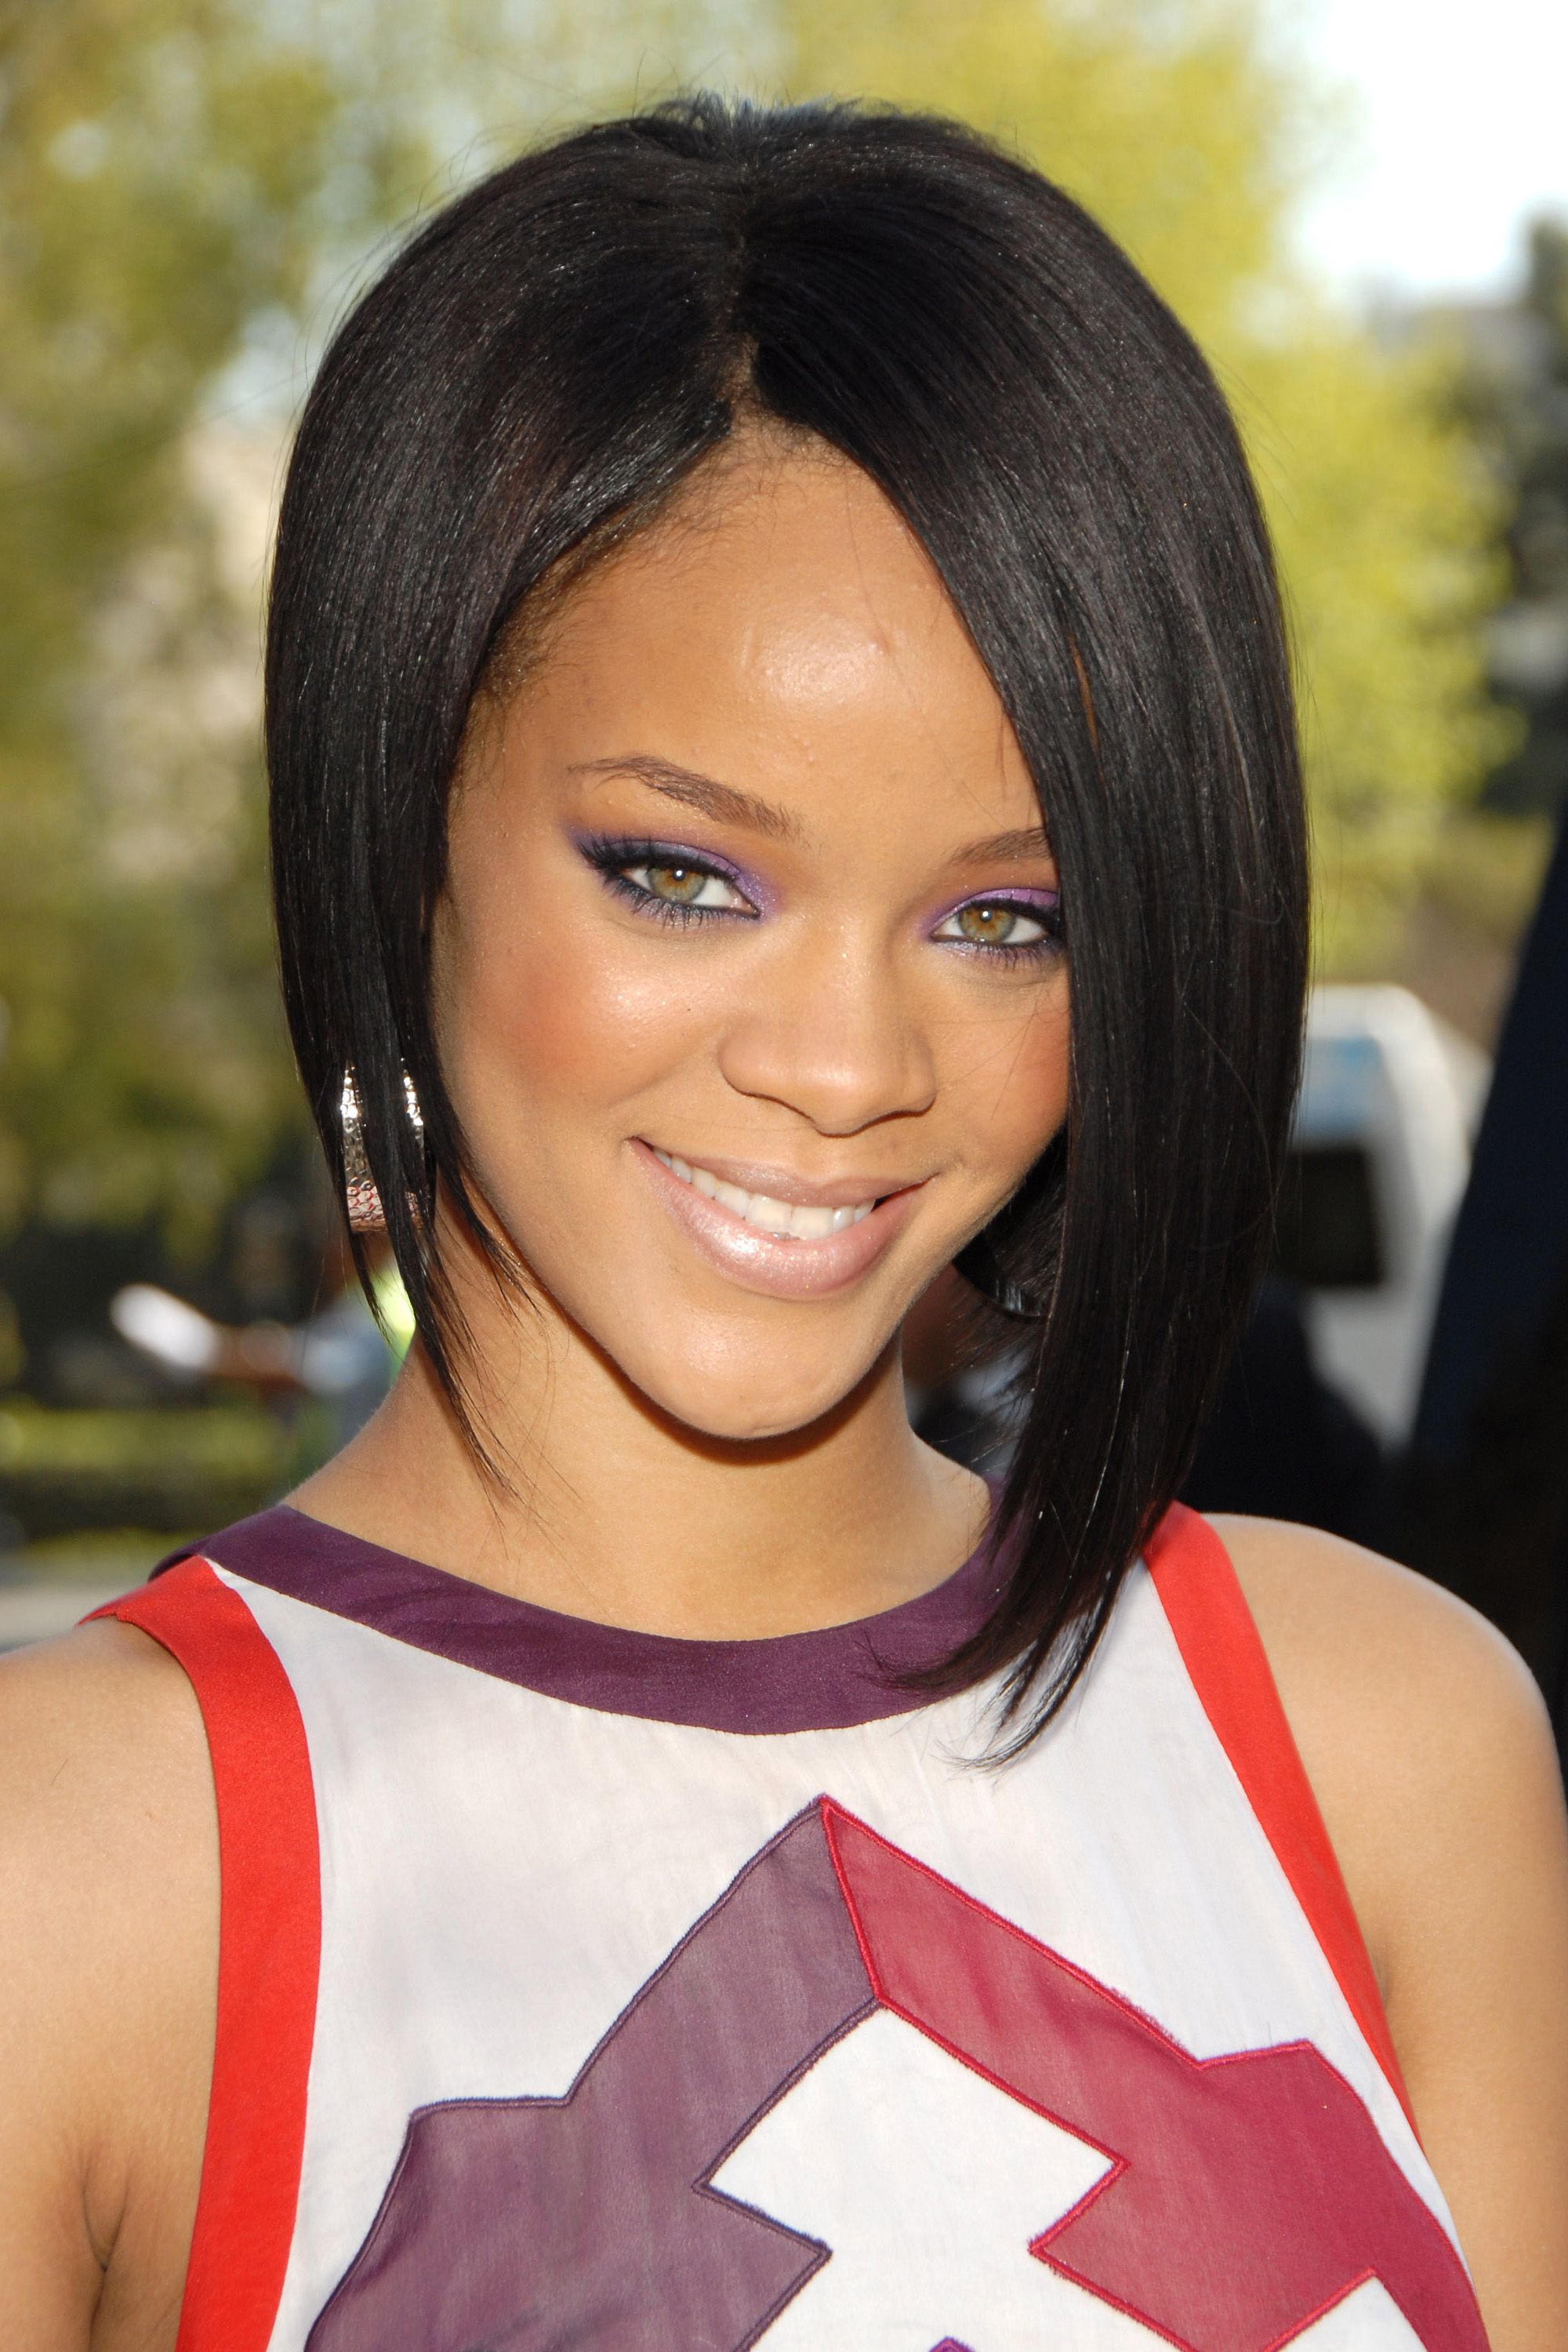 Rihanna's Complete Hair Transformation - Rihanna Hairstyles and Hair Color